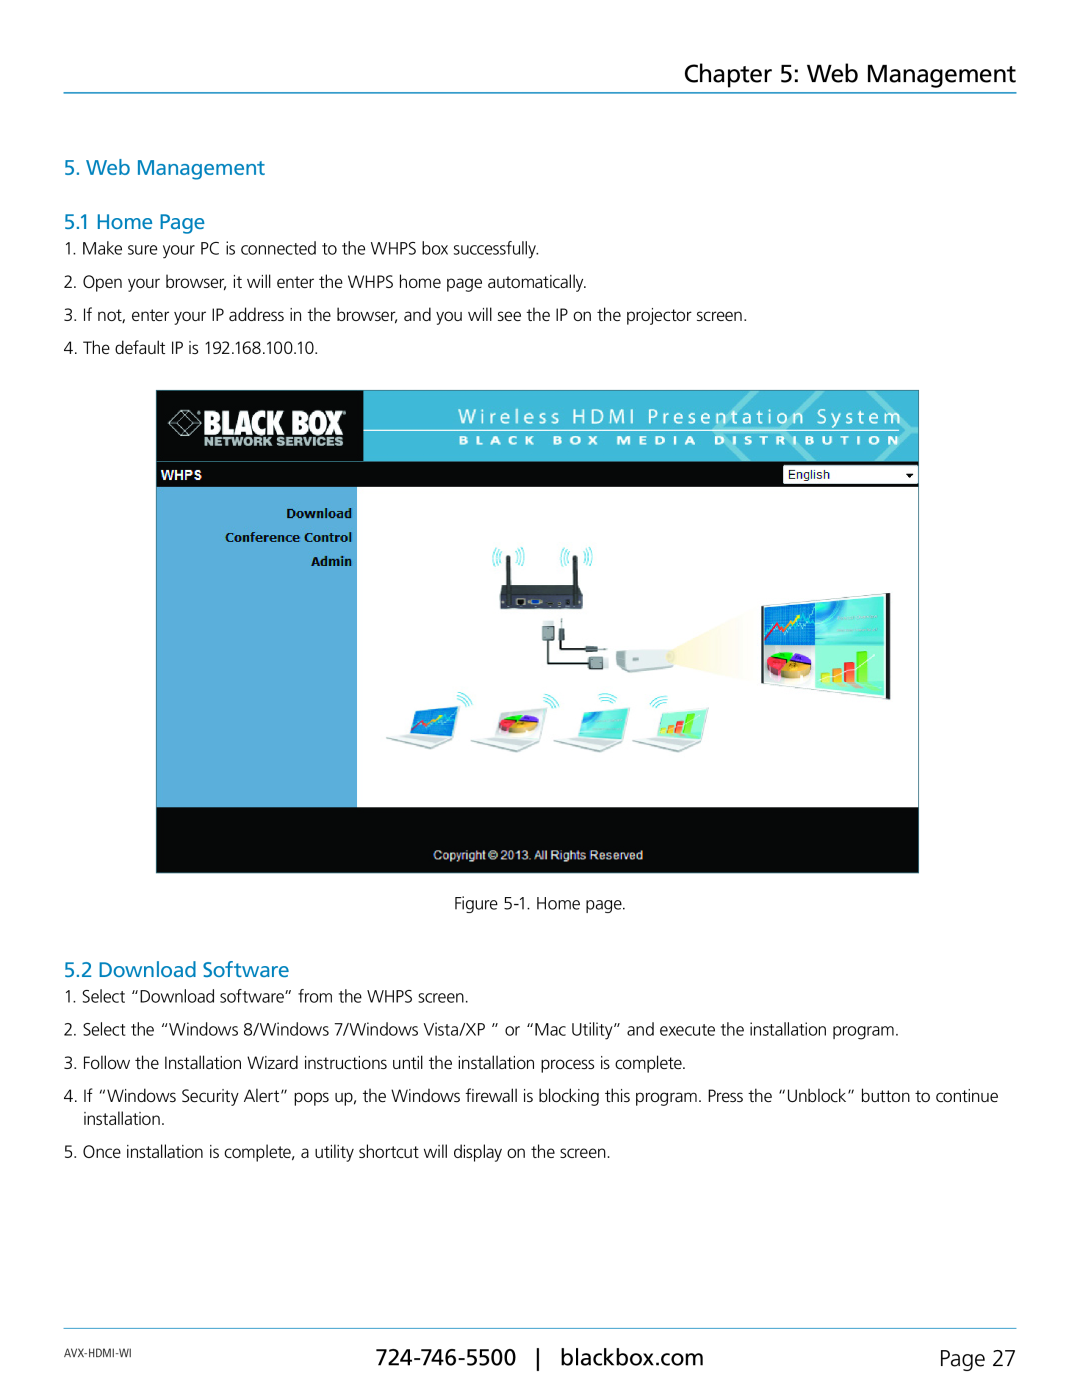 Black Box Wireless HDMI Presentation System (WHPS), AVX-HDMI-WI manual Web Management 5.1 Home Page, Download Software 